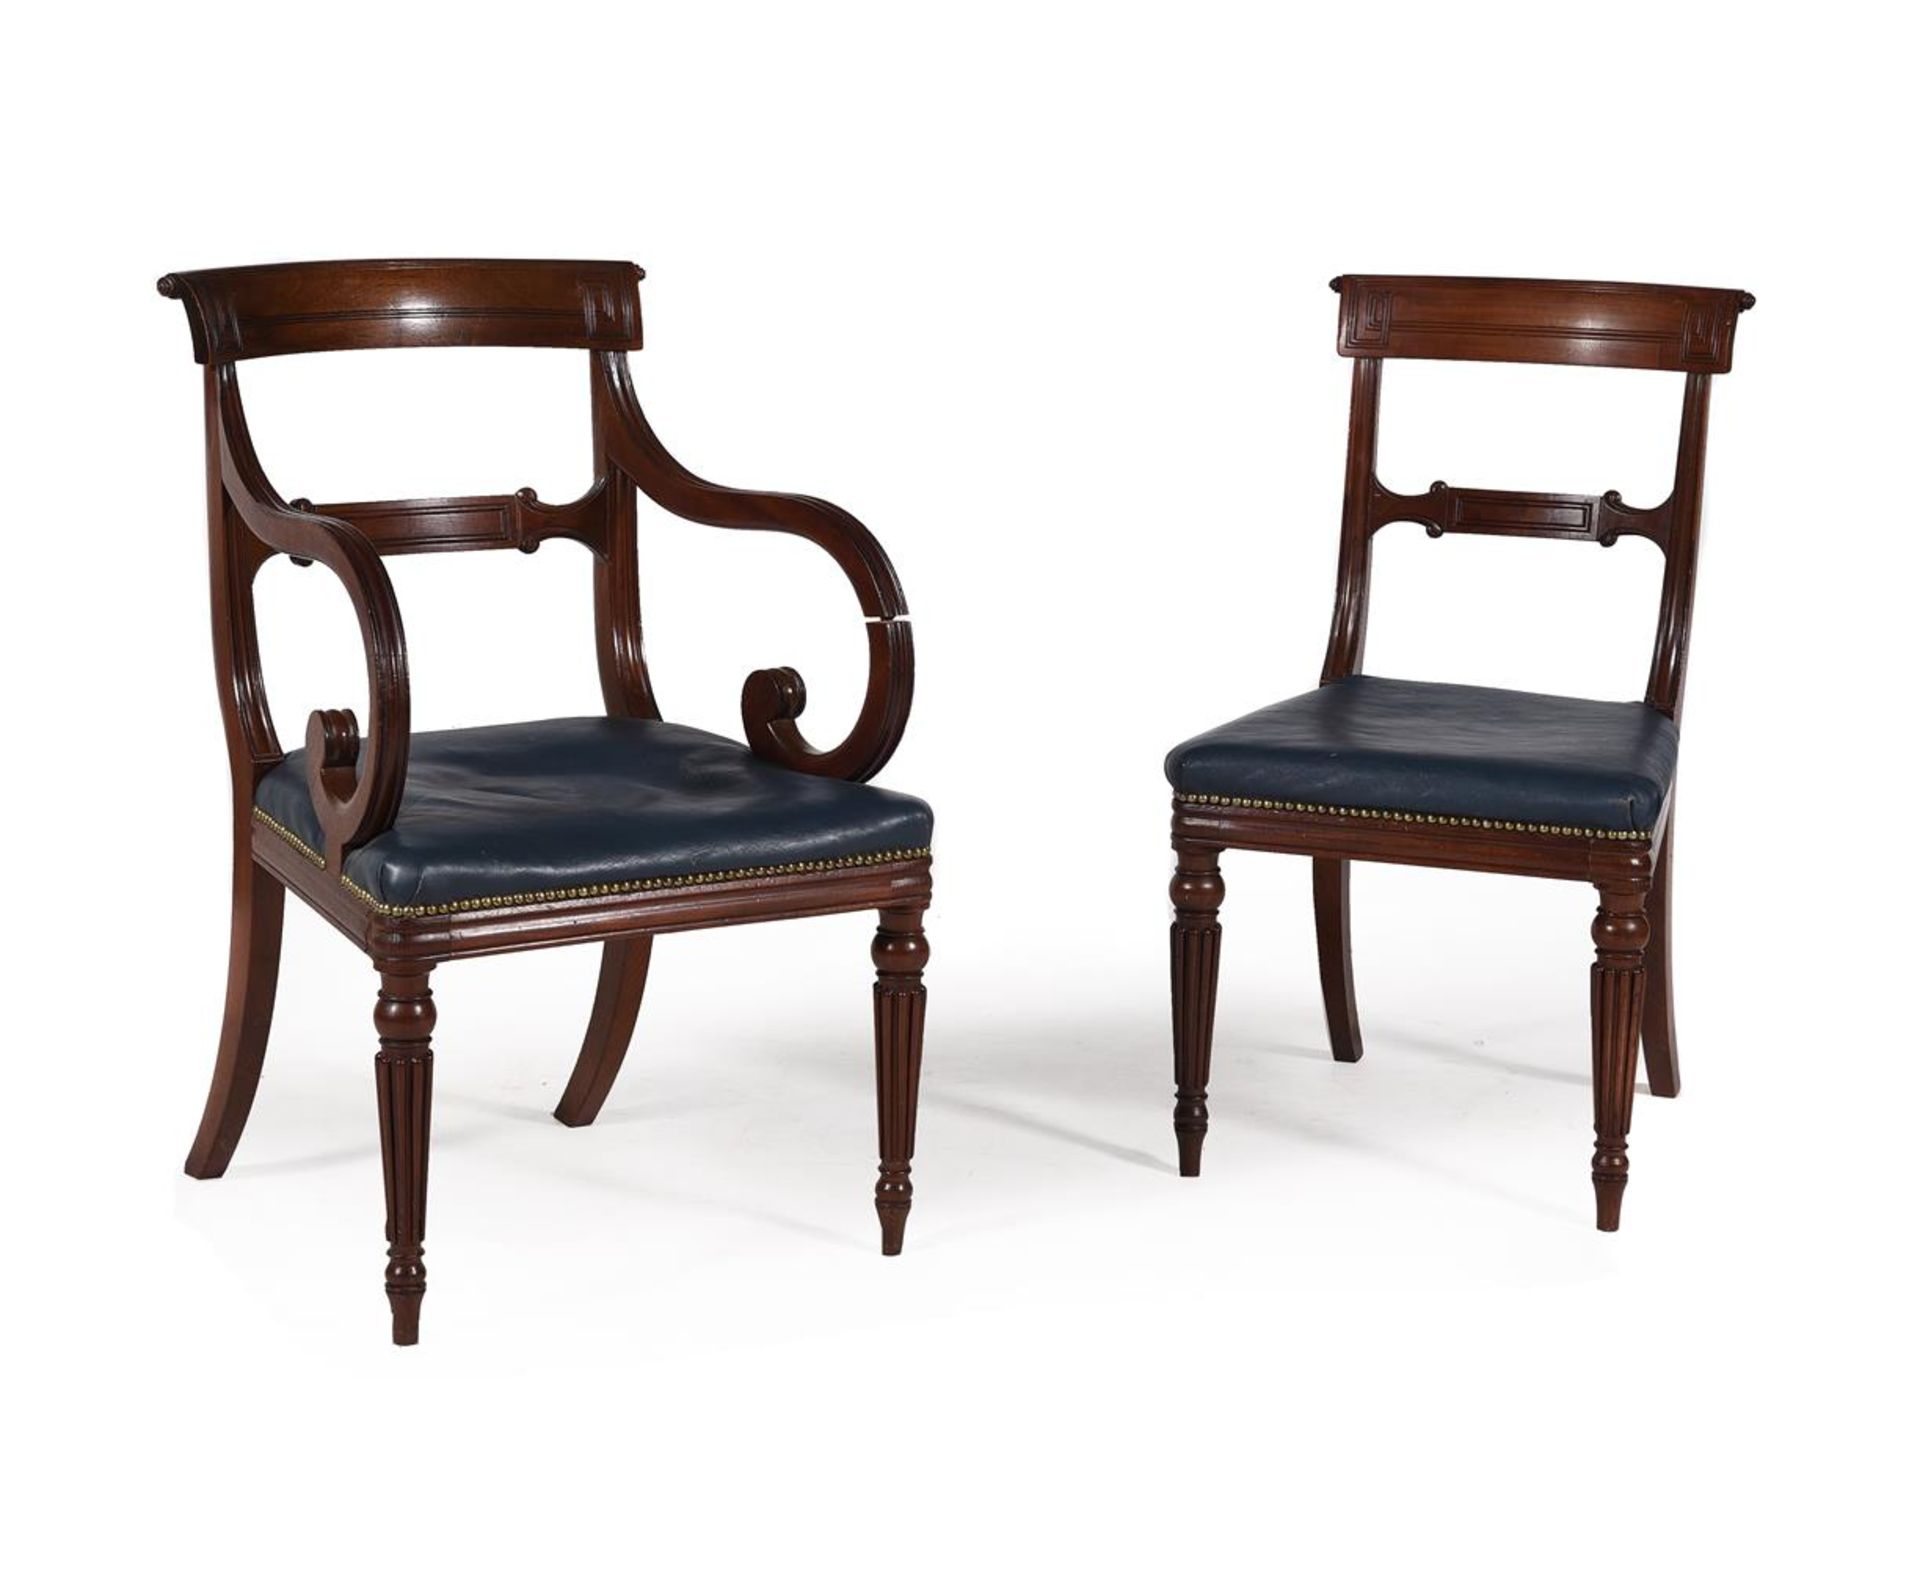 A SET OF TEN GEORGE IV MAHOGANY DINING CHAIRS, ATTRIBUTED TO GILLOWS, CIRCA 1825 - Image 2 of 8